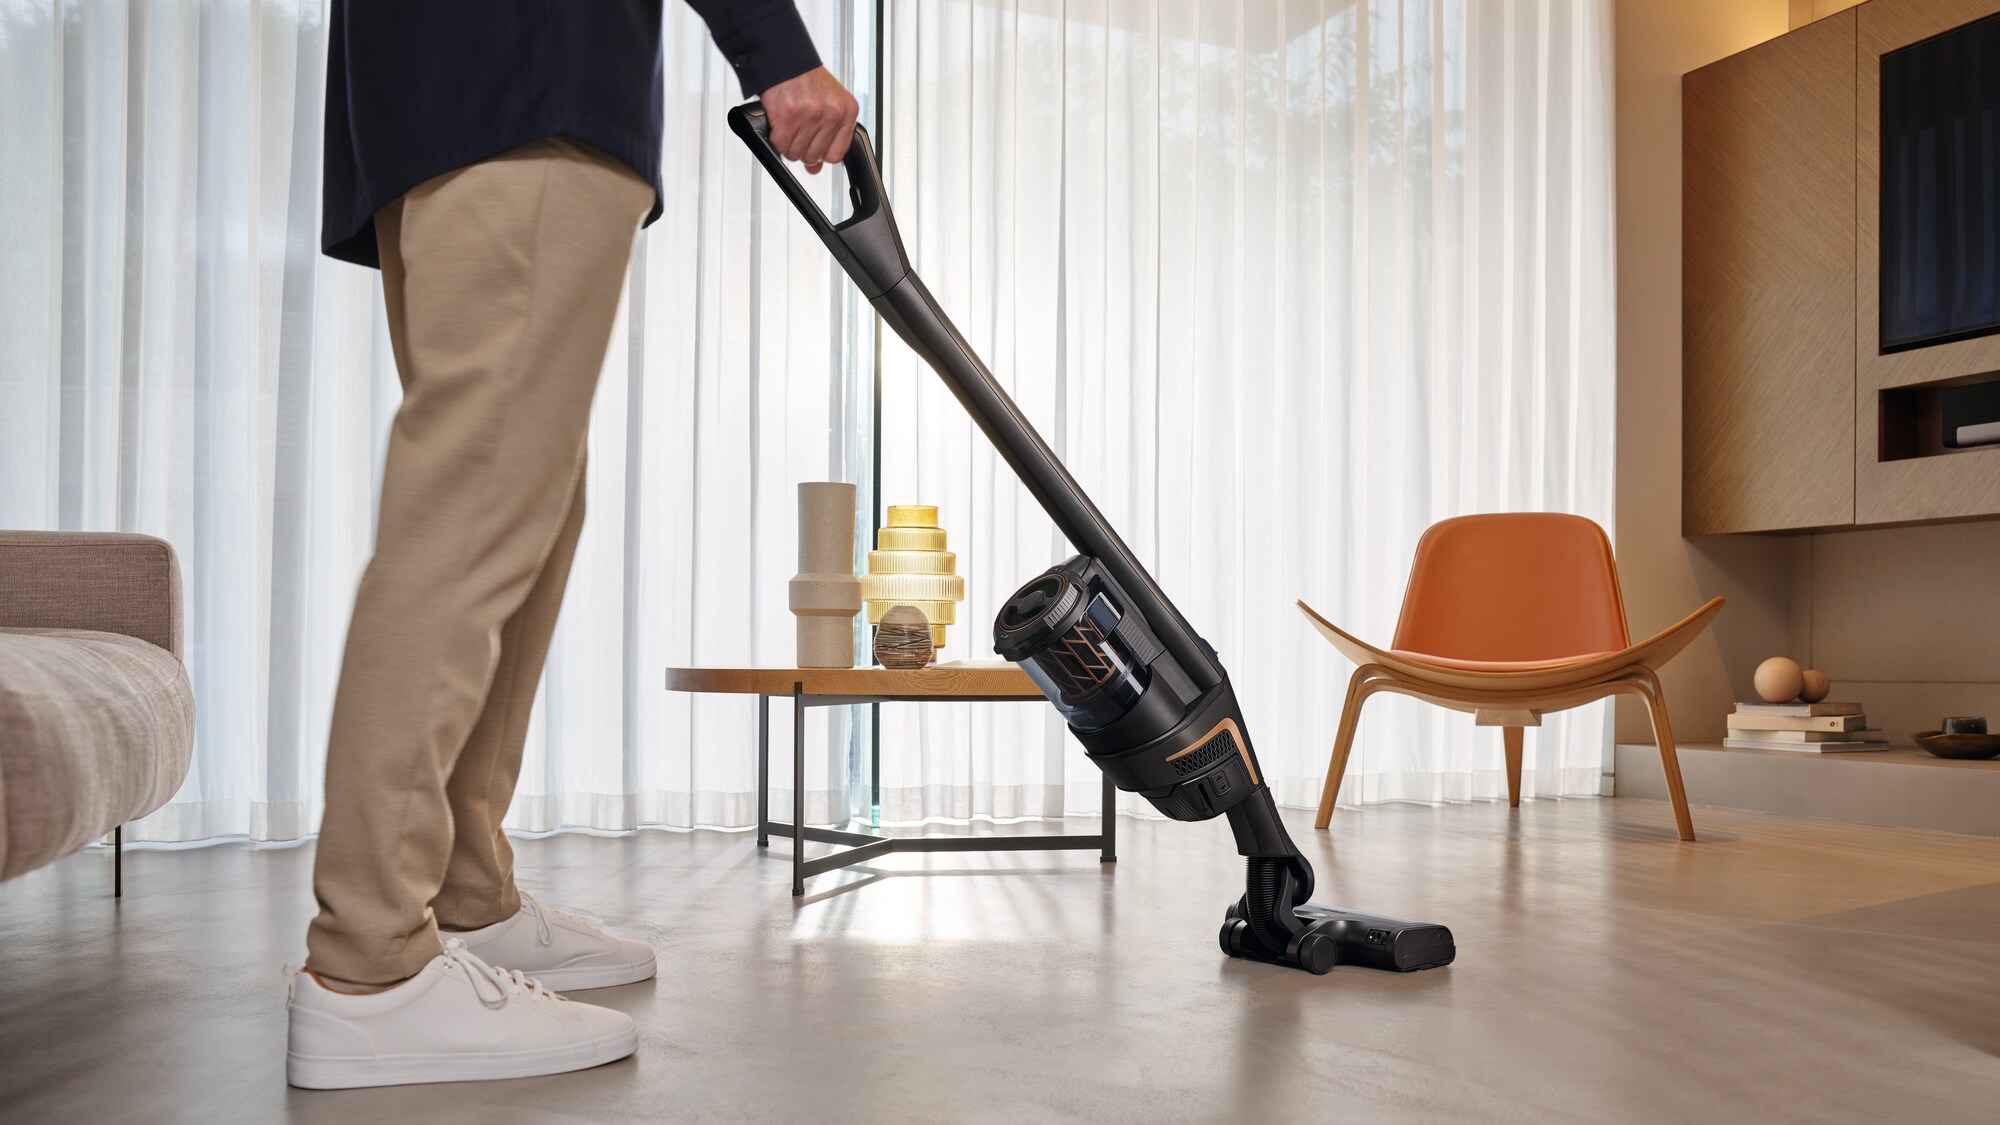 Miele has the Right Vacuum Cleaner for Everyone